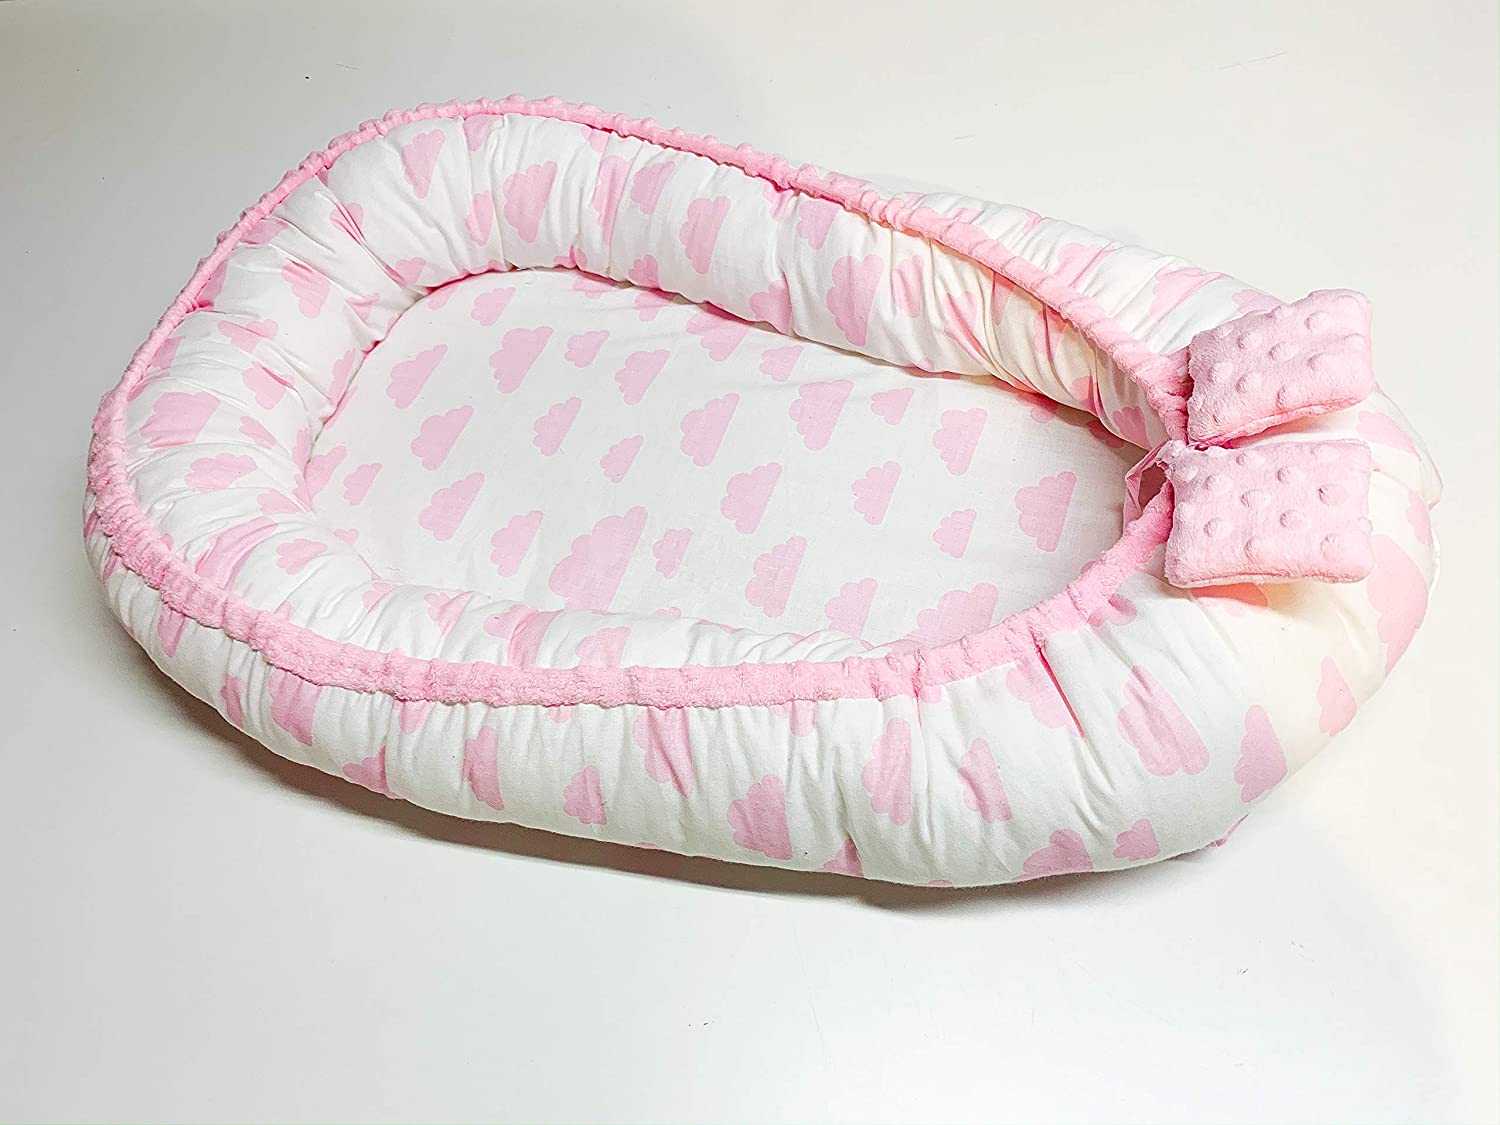 Cuddly nest for babies and infants, cot bumper, travel cot, 100% cotton, anti-allergic